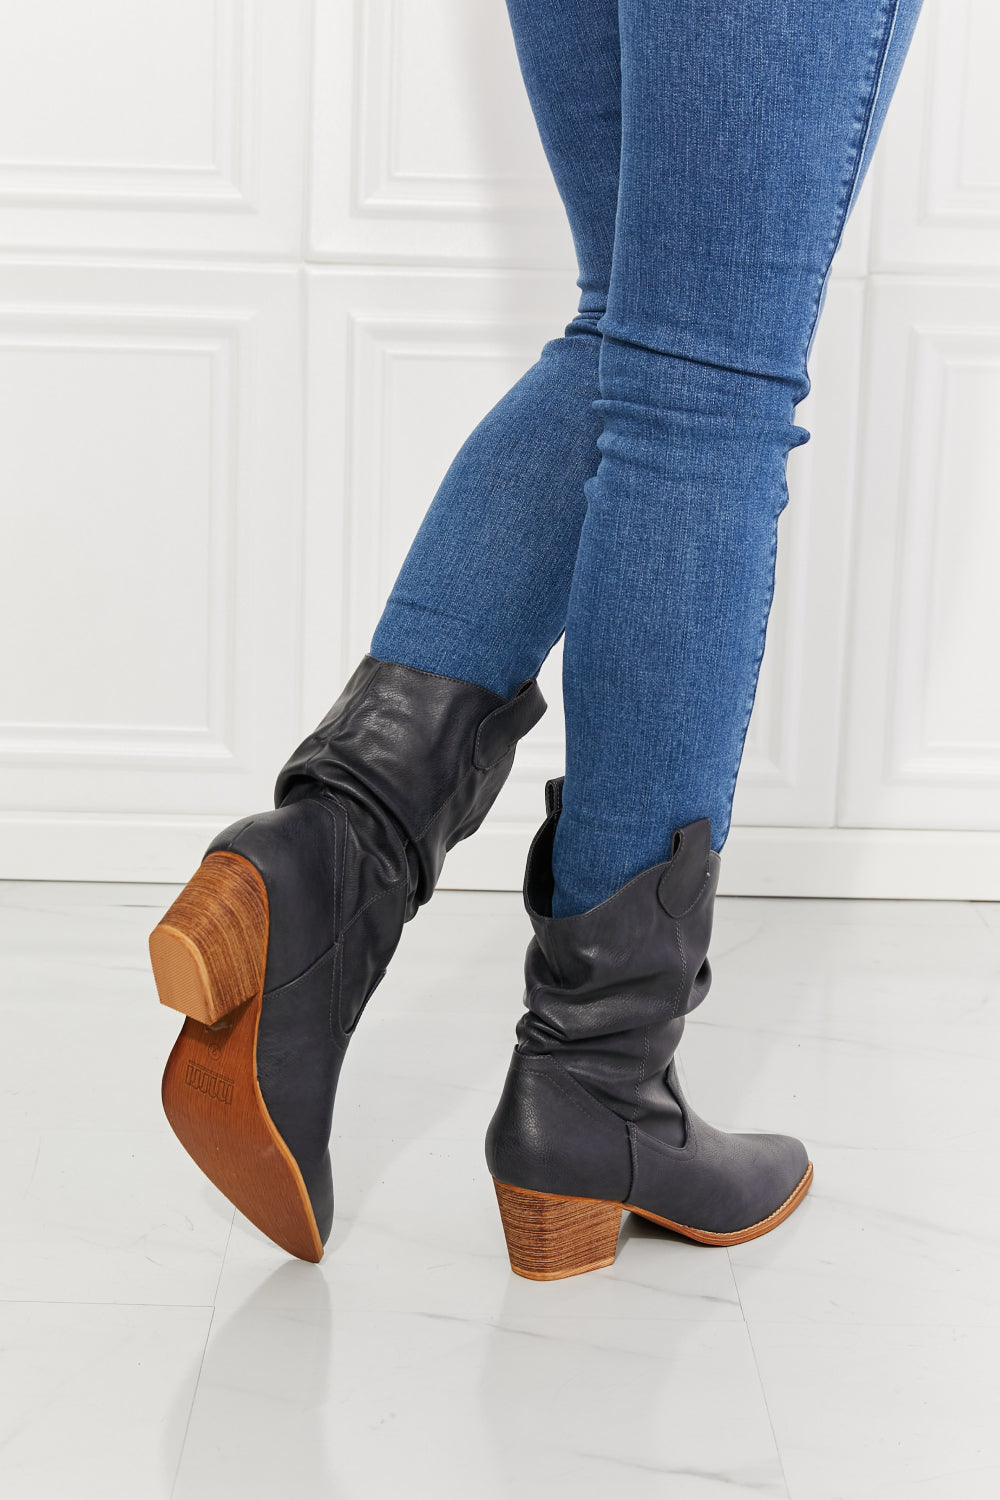 Better in Texas Scrunch Cowboy Boots in Navy - Southern Soul Collectives